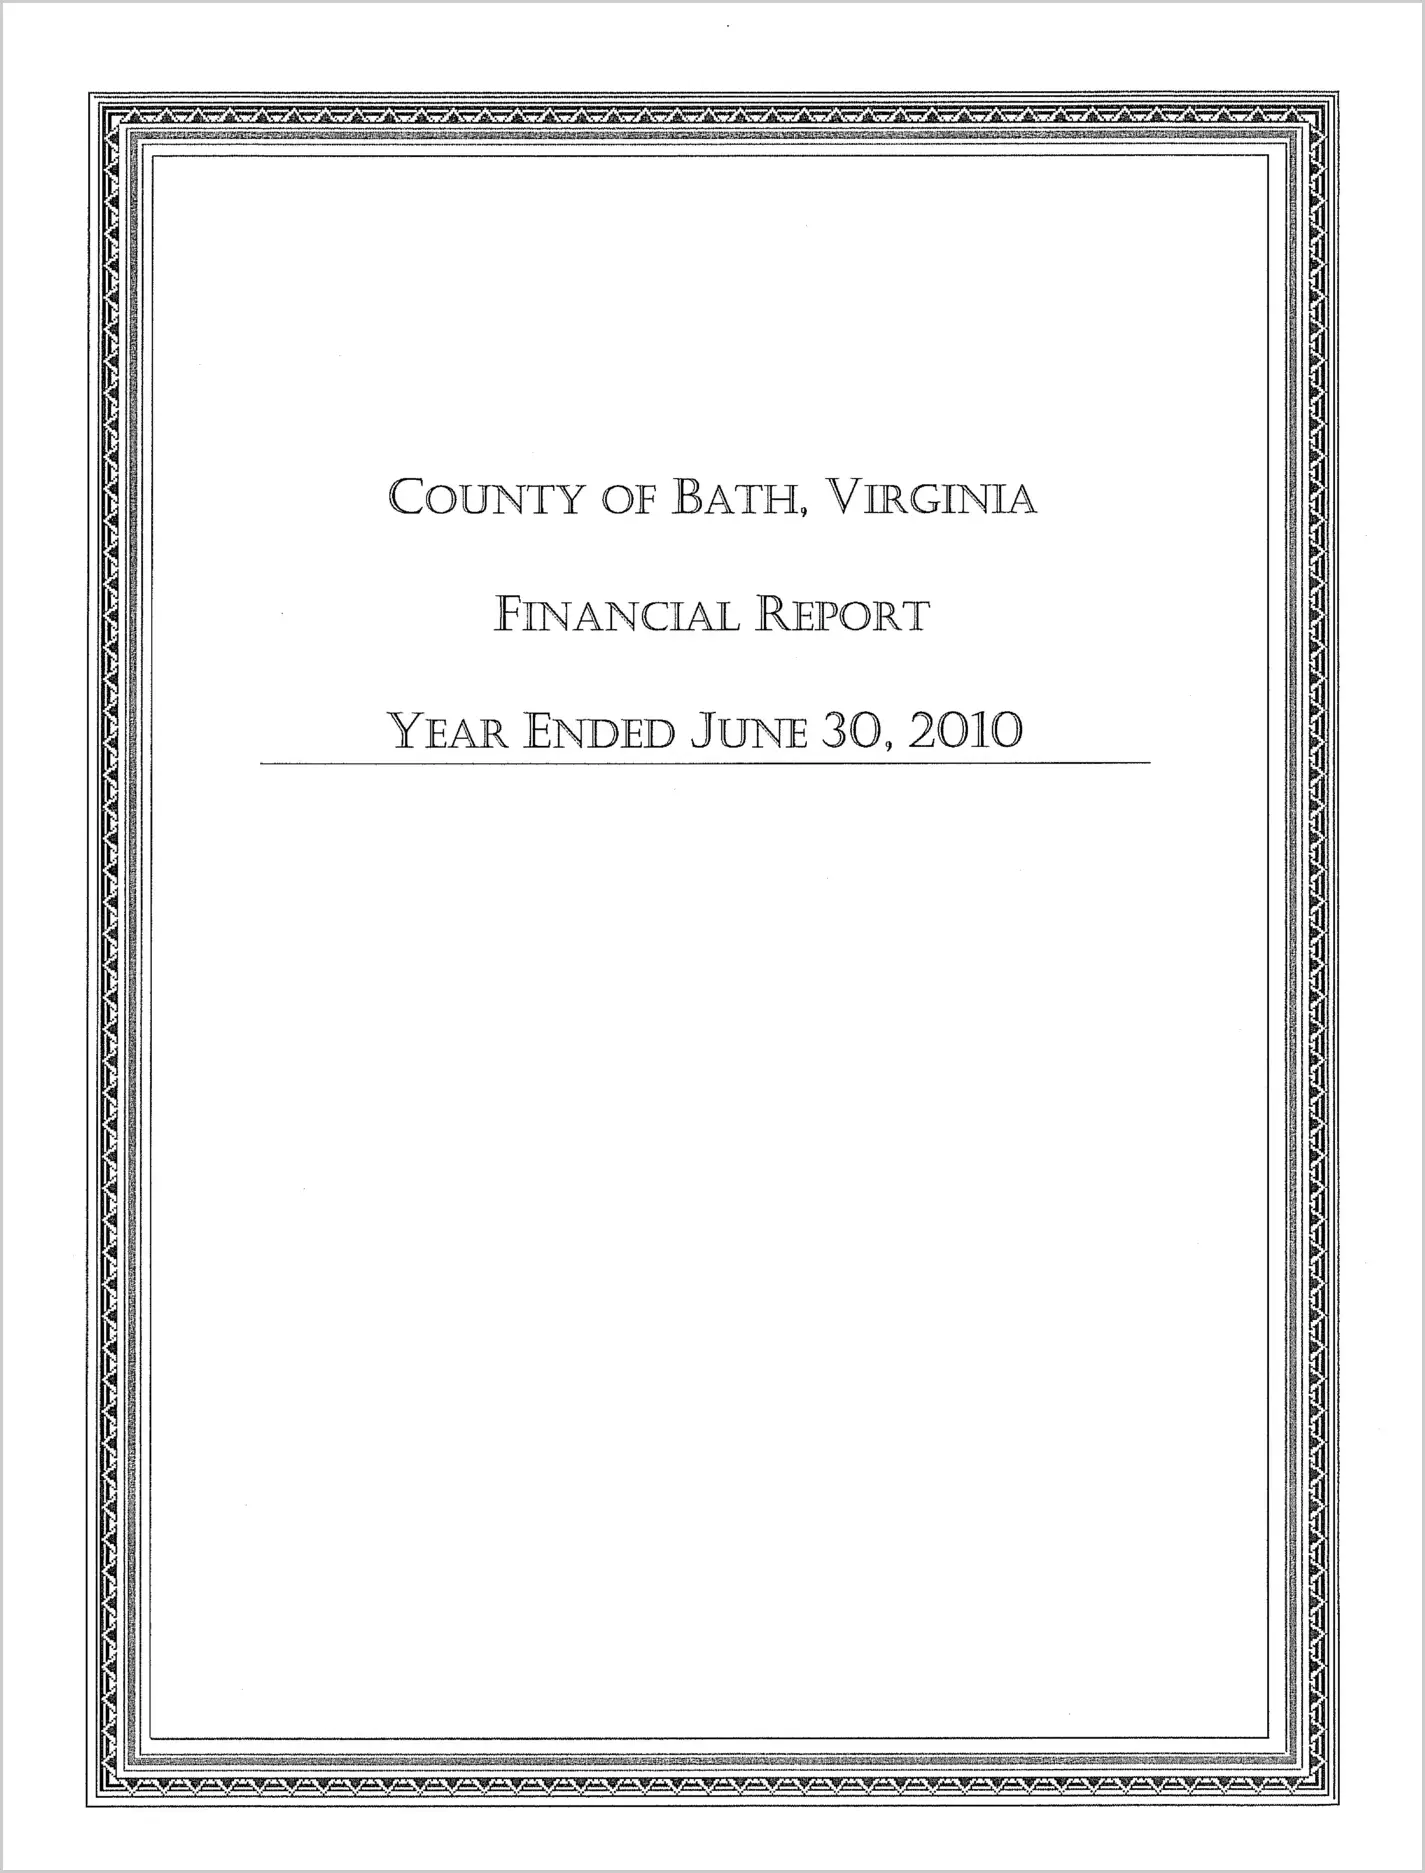 2010 Annual Financial Report for County of Bath